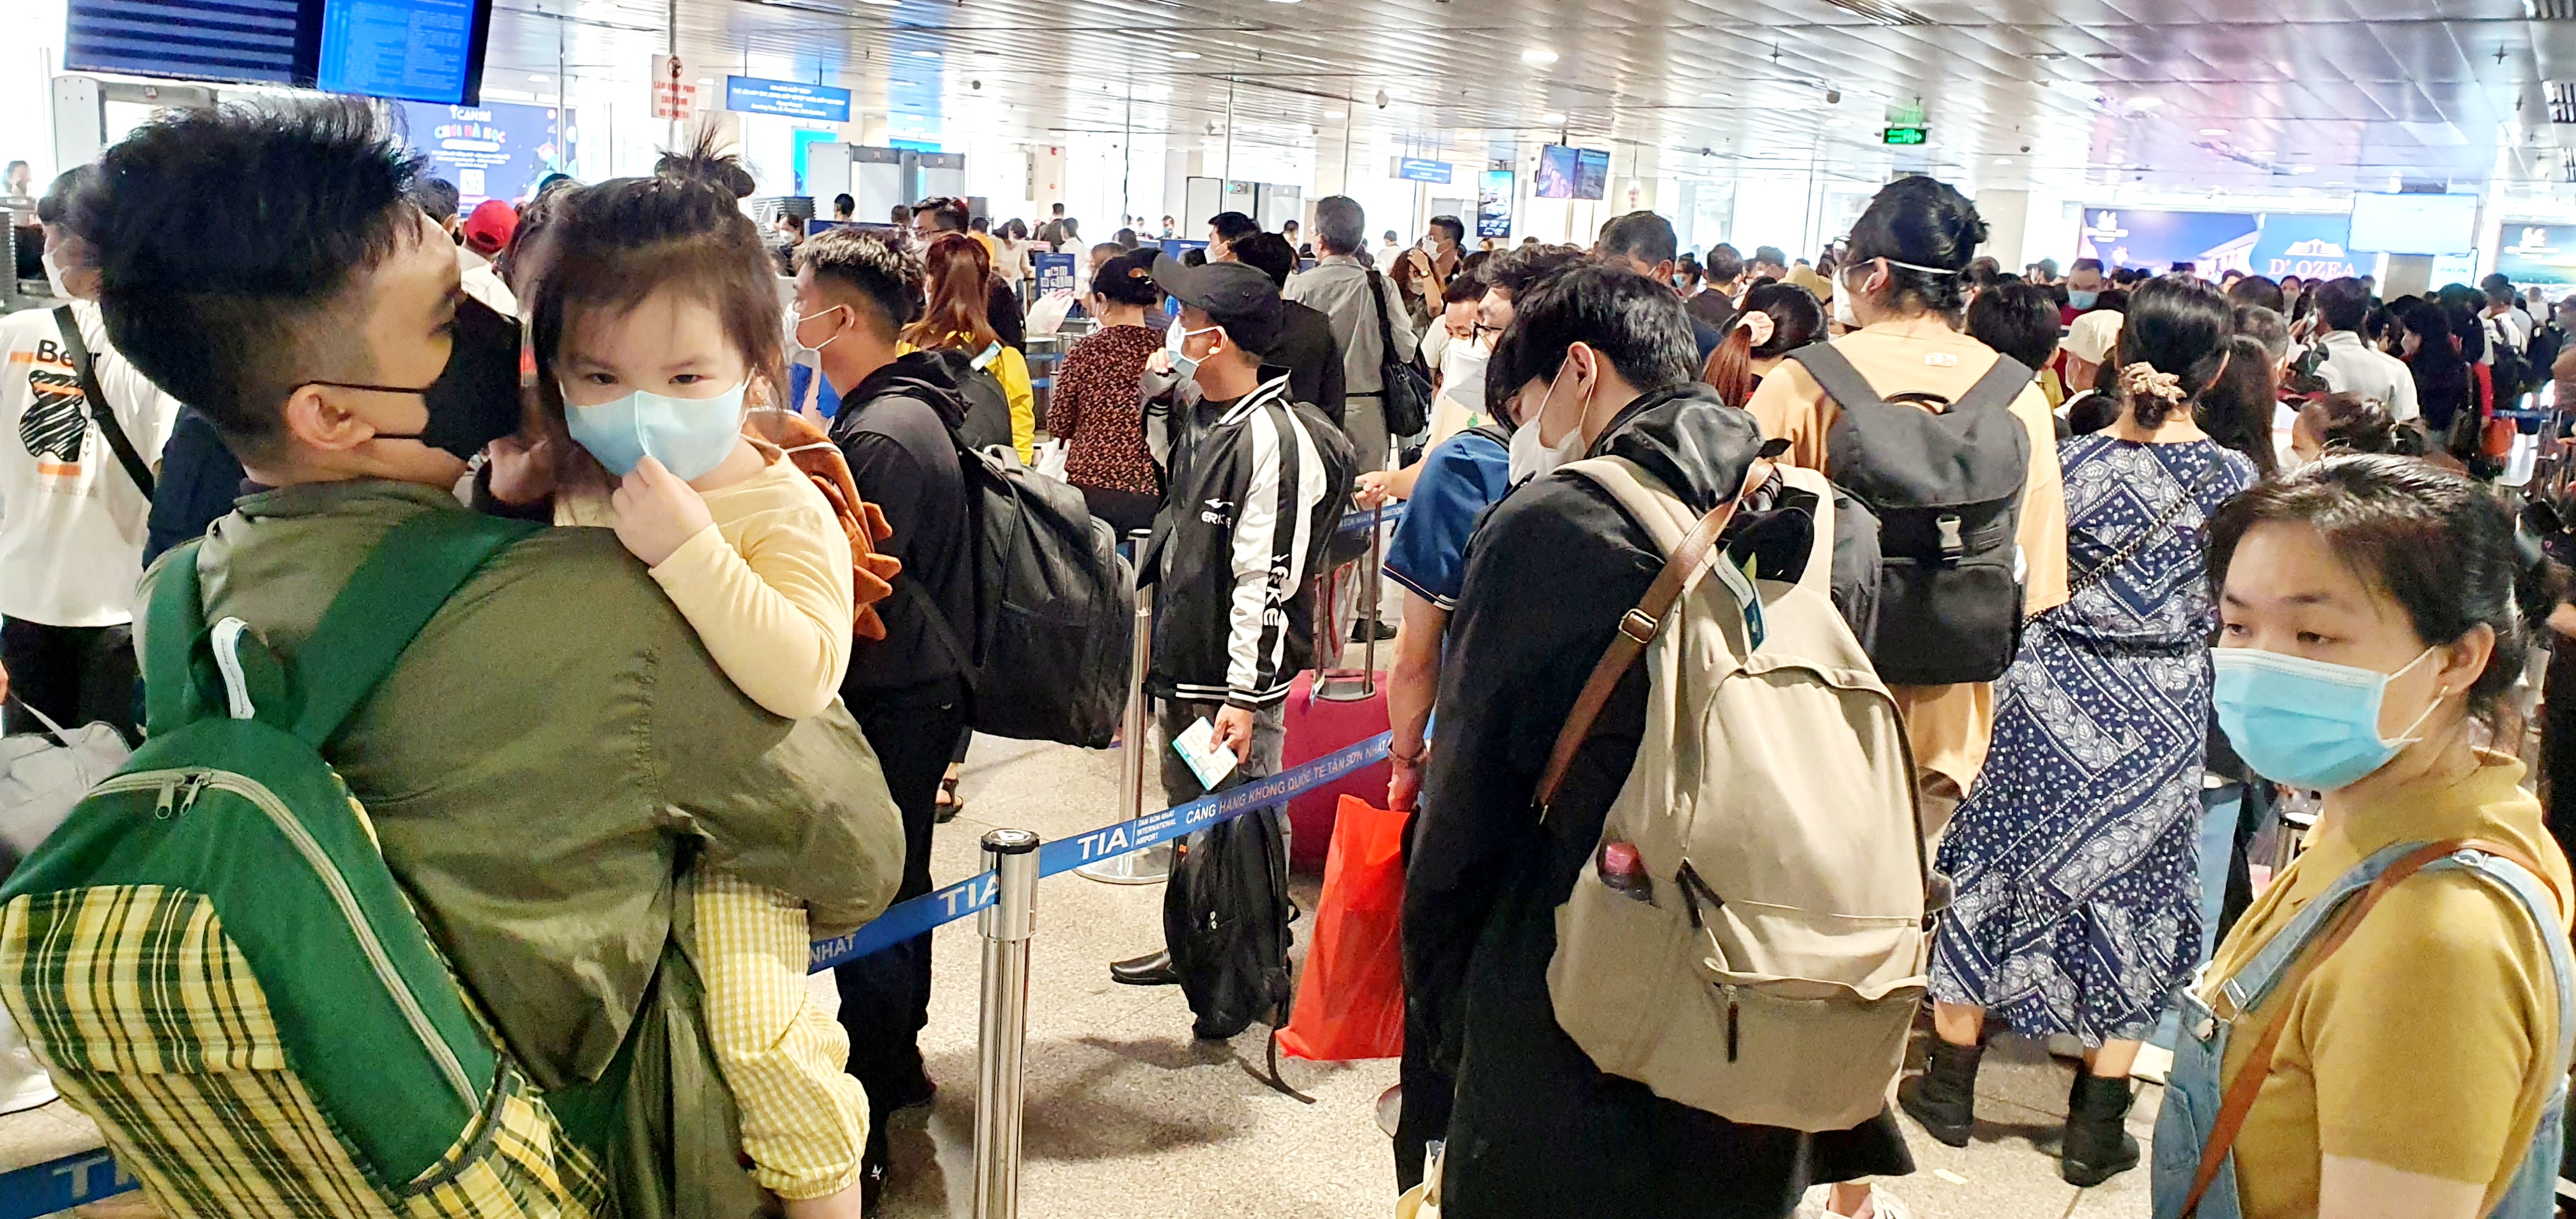 People wait for check-in procedures at Tan Son Nhat International Airport in Ho Chi Minh City, January 23, 2022. Photo: Cong Trung / Tuoi Tre